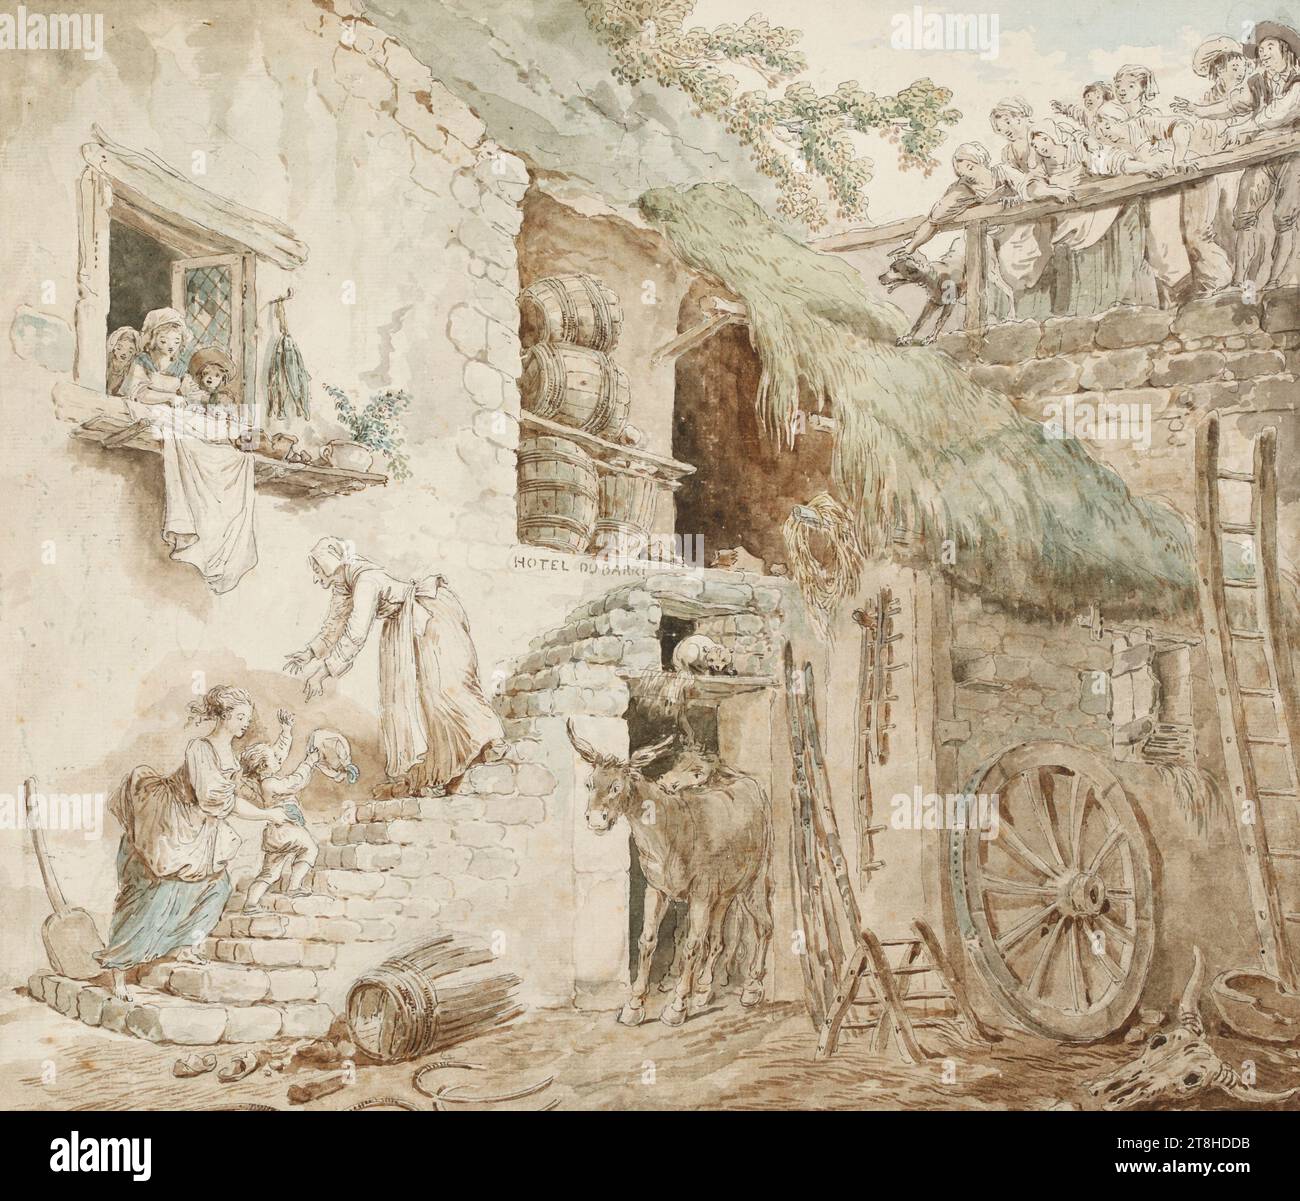 HUBERT ROBERT, Allégorie de la chute de la famille du Barry, ca. 1774, sheet, 348 x 300 mm, pen in gray-brown and watercolor over chalk, traces, on handmade paper, old mounted, Allégorie de la chute de la famille du Barry, original title, Allegory of the decline of the Du Barry family, HUBERT ROBERT, 18TH CENTURY, ROCOCO EARLY CLASSICISM, DRAWING, pen in gray-brown and watercolor over chalk, traces, on handmade paper, old mounted, INK?, INK?, WATERCOLOR, CHALK, HANDMADE PAPER, PEN DRAWING, WATERCOLOR, BRUSH DRAWING, CHALK DRAWING, FRENCH, PICTURE DRAWING, AUTONOMOUS DRAWING, Signed lower Stock Photo